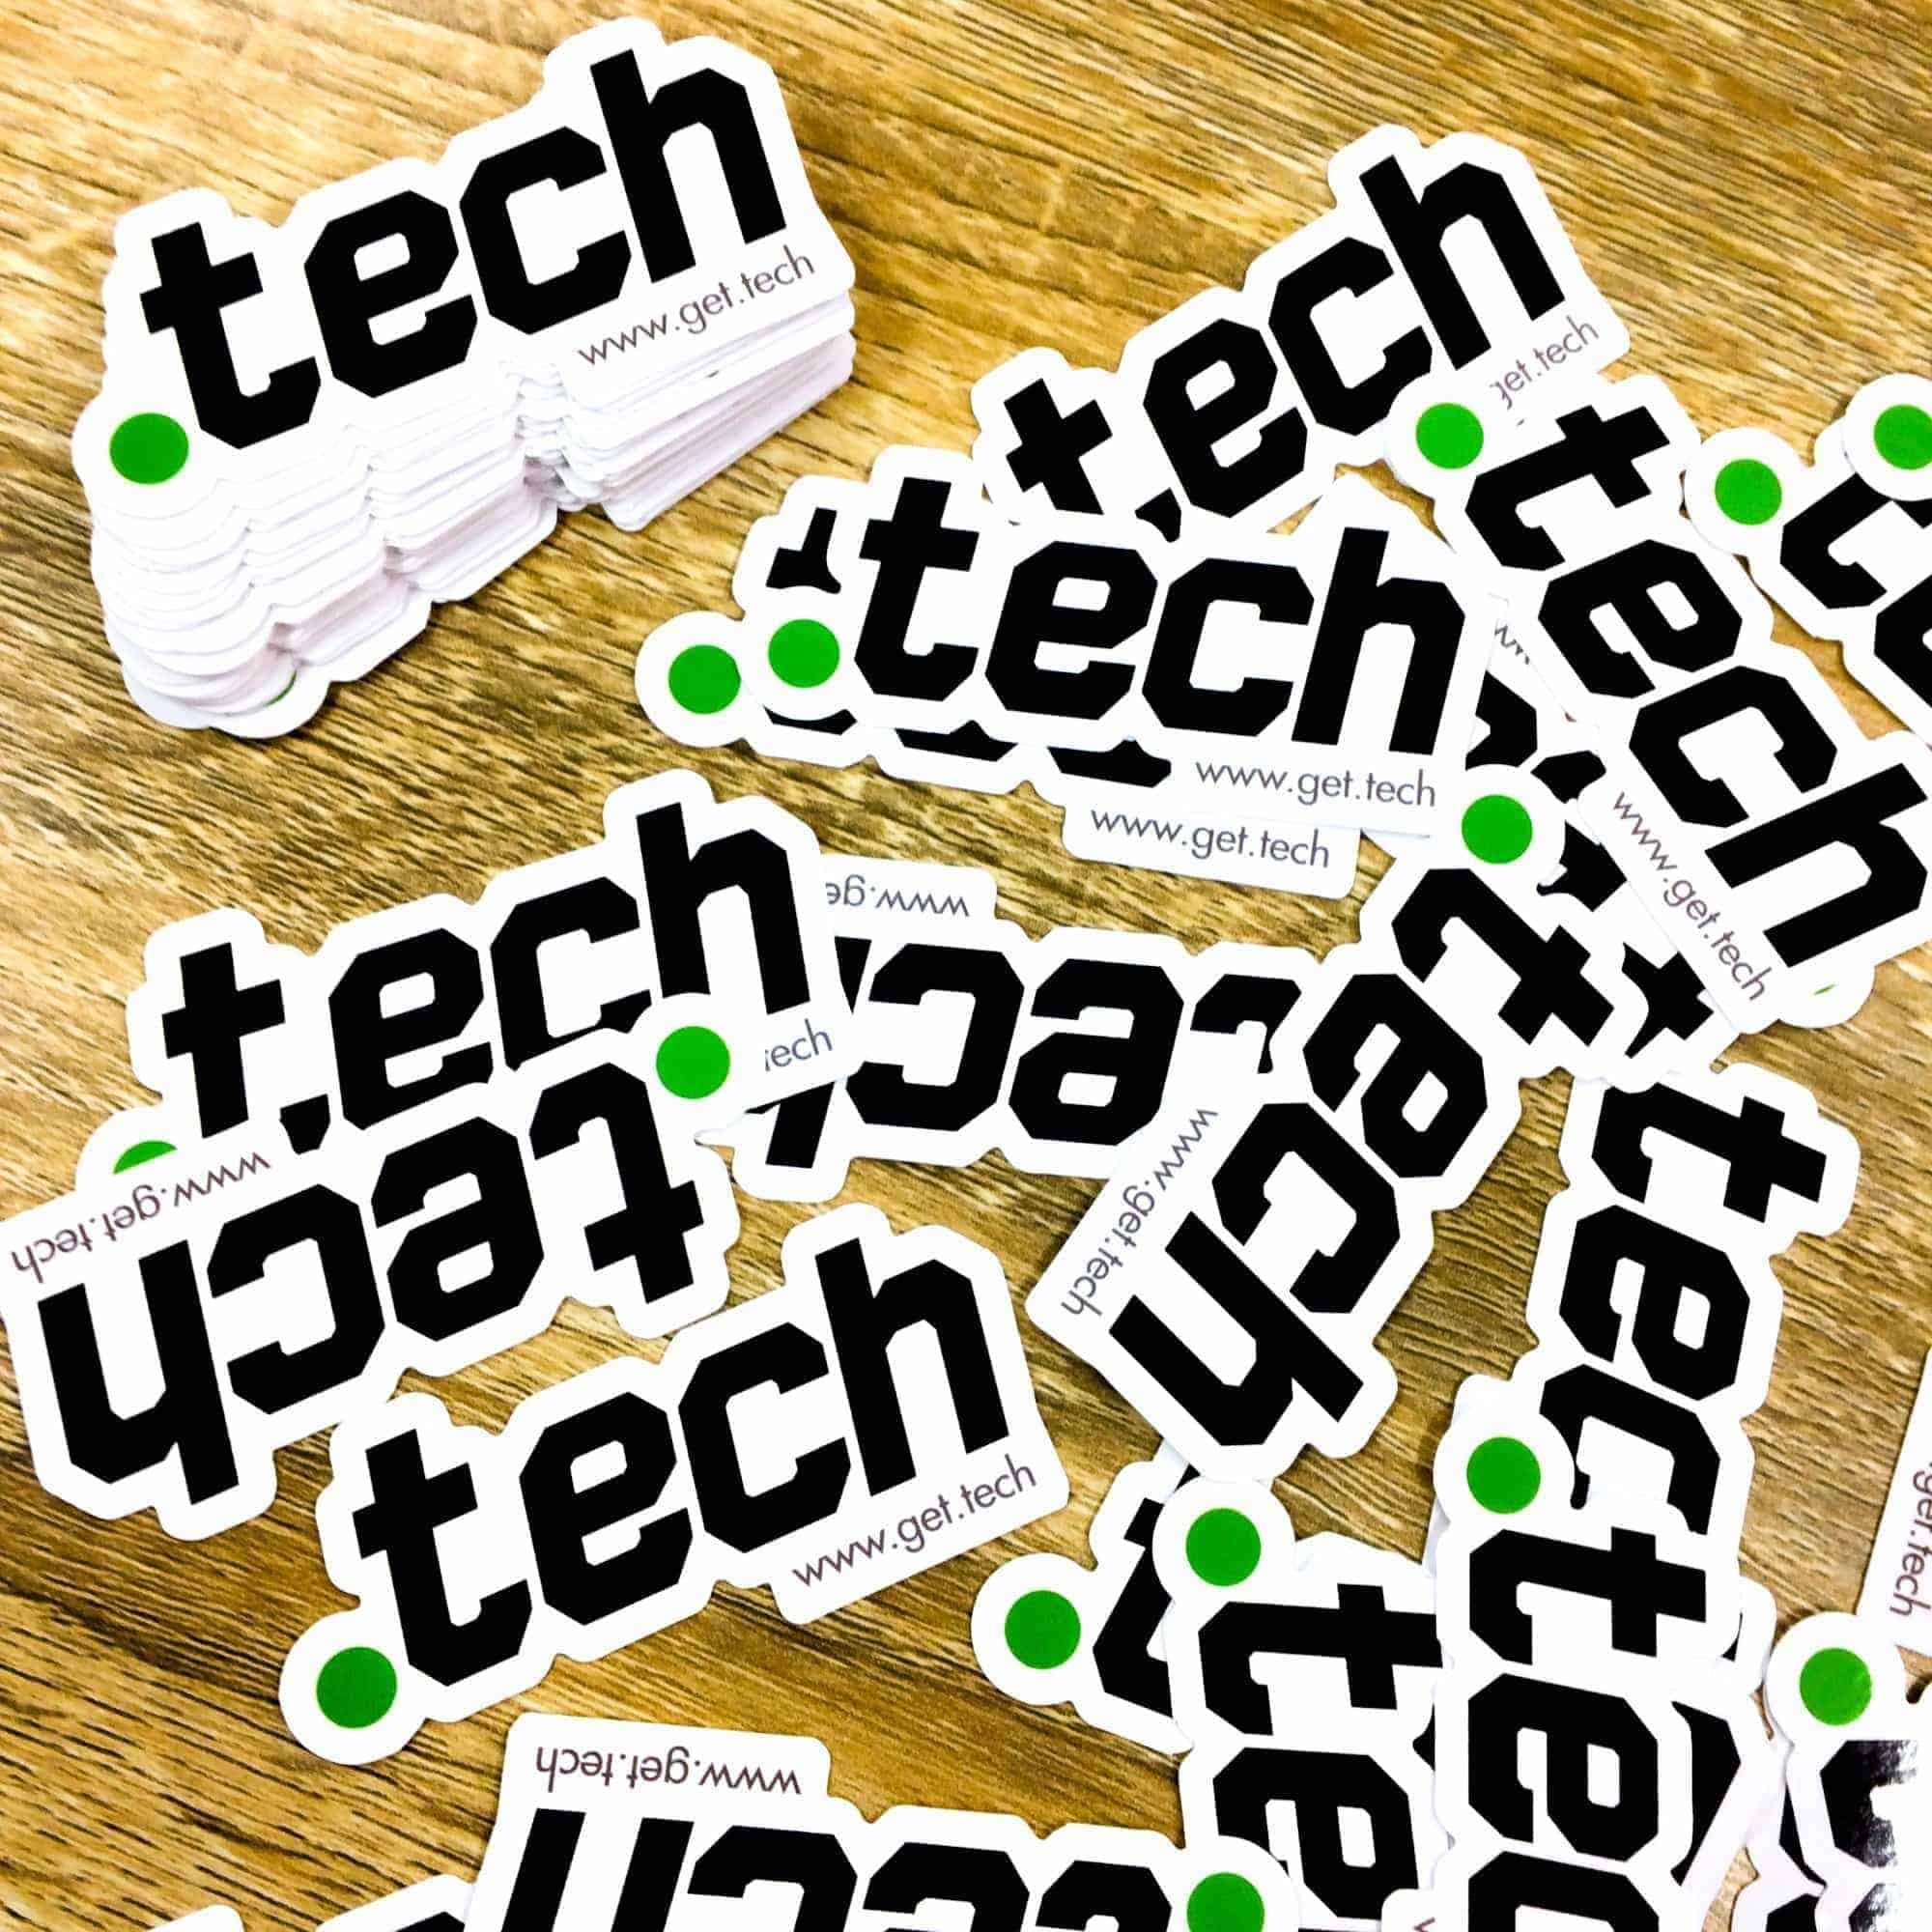 Custom shaped die-cut stickers are perfect for sticking onto laptops